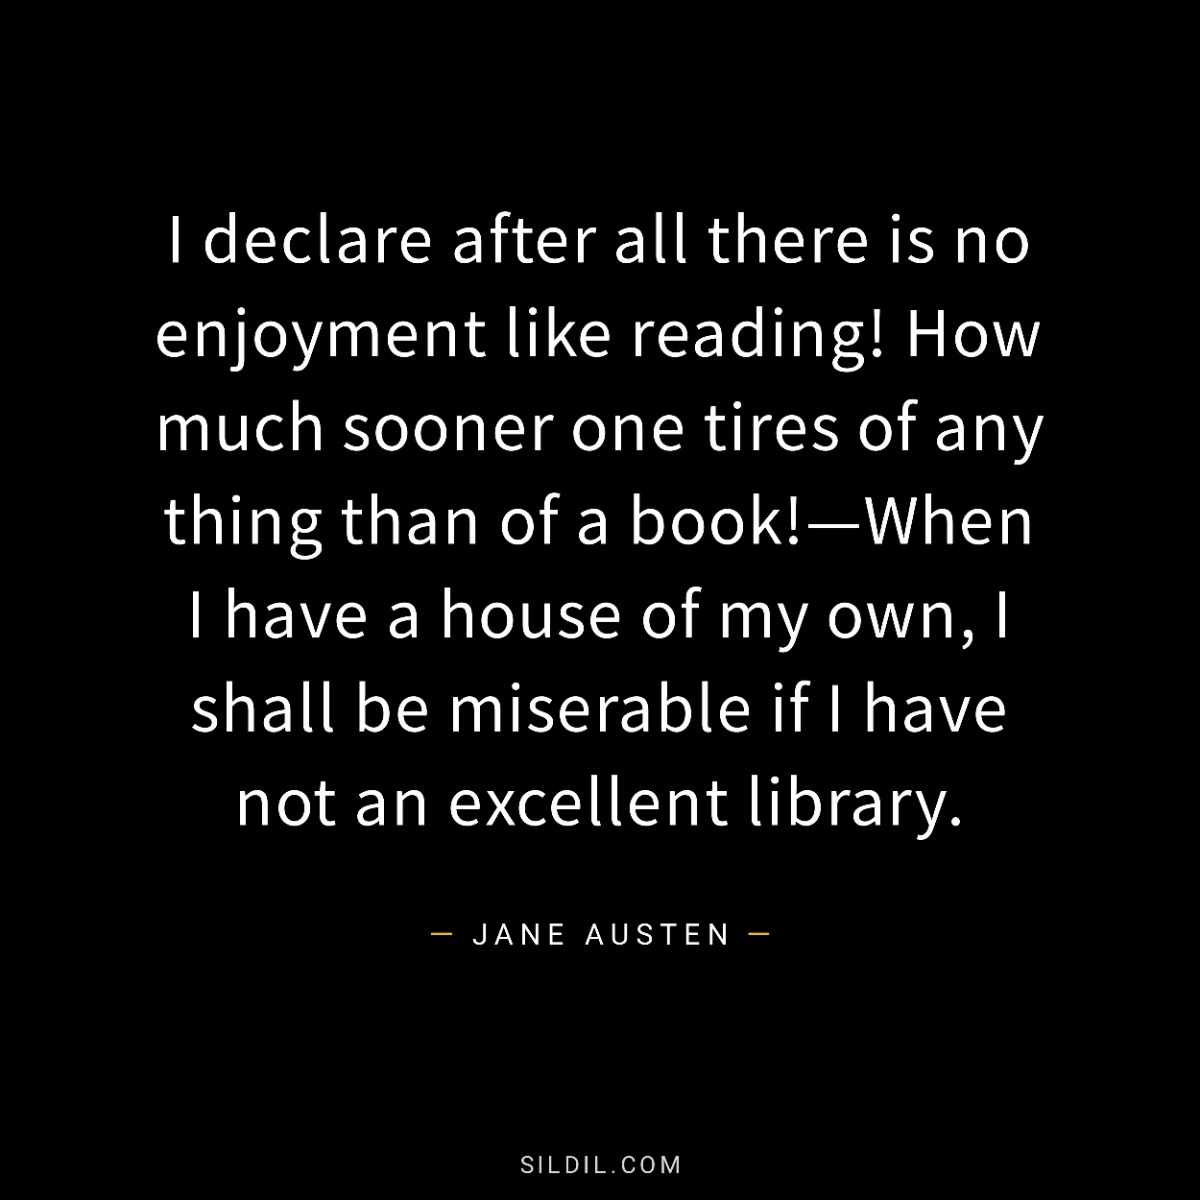 I declare after all there is no enjoyment like reading! How much sooner one tires of any thing than of a book!—When I have a house of my own, I shall be miserable if I have not an excellent library.